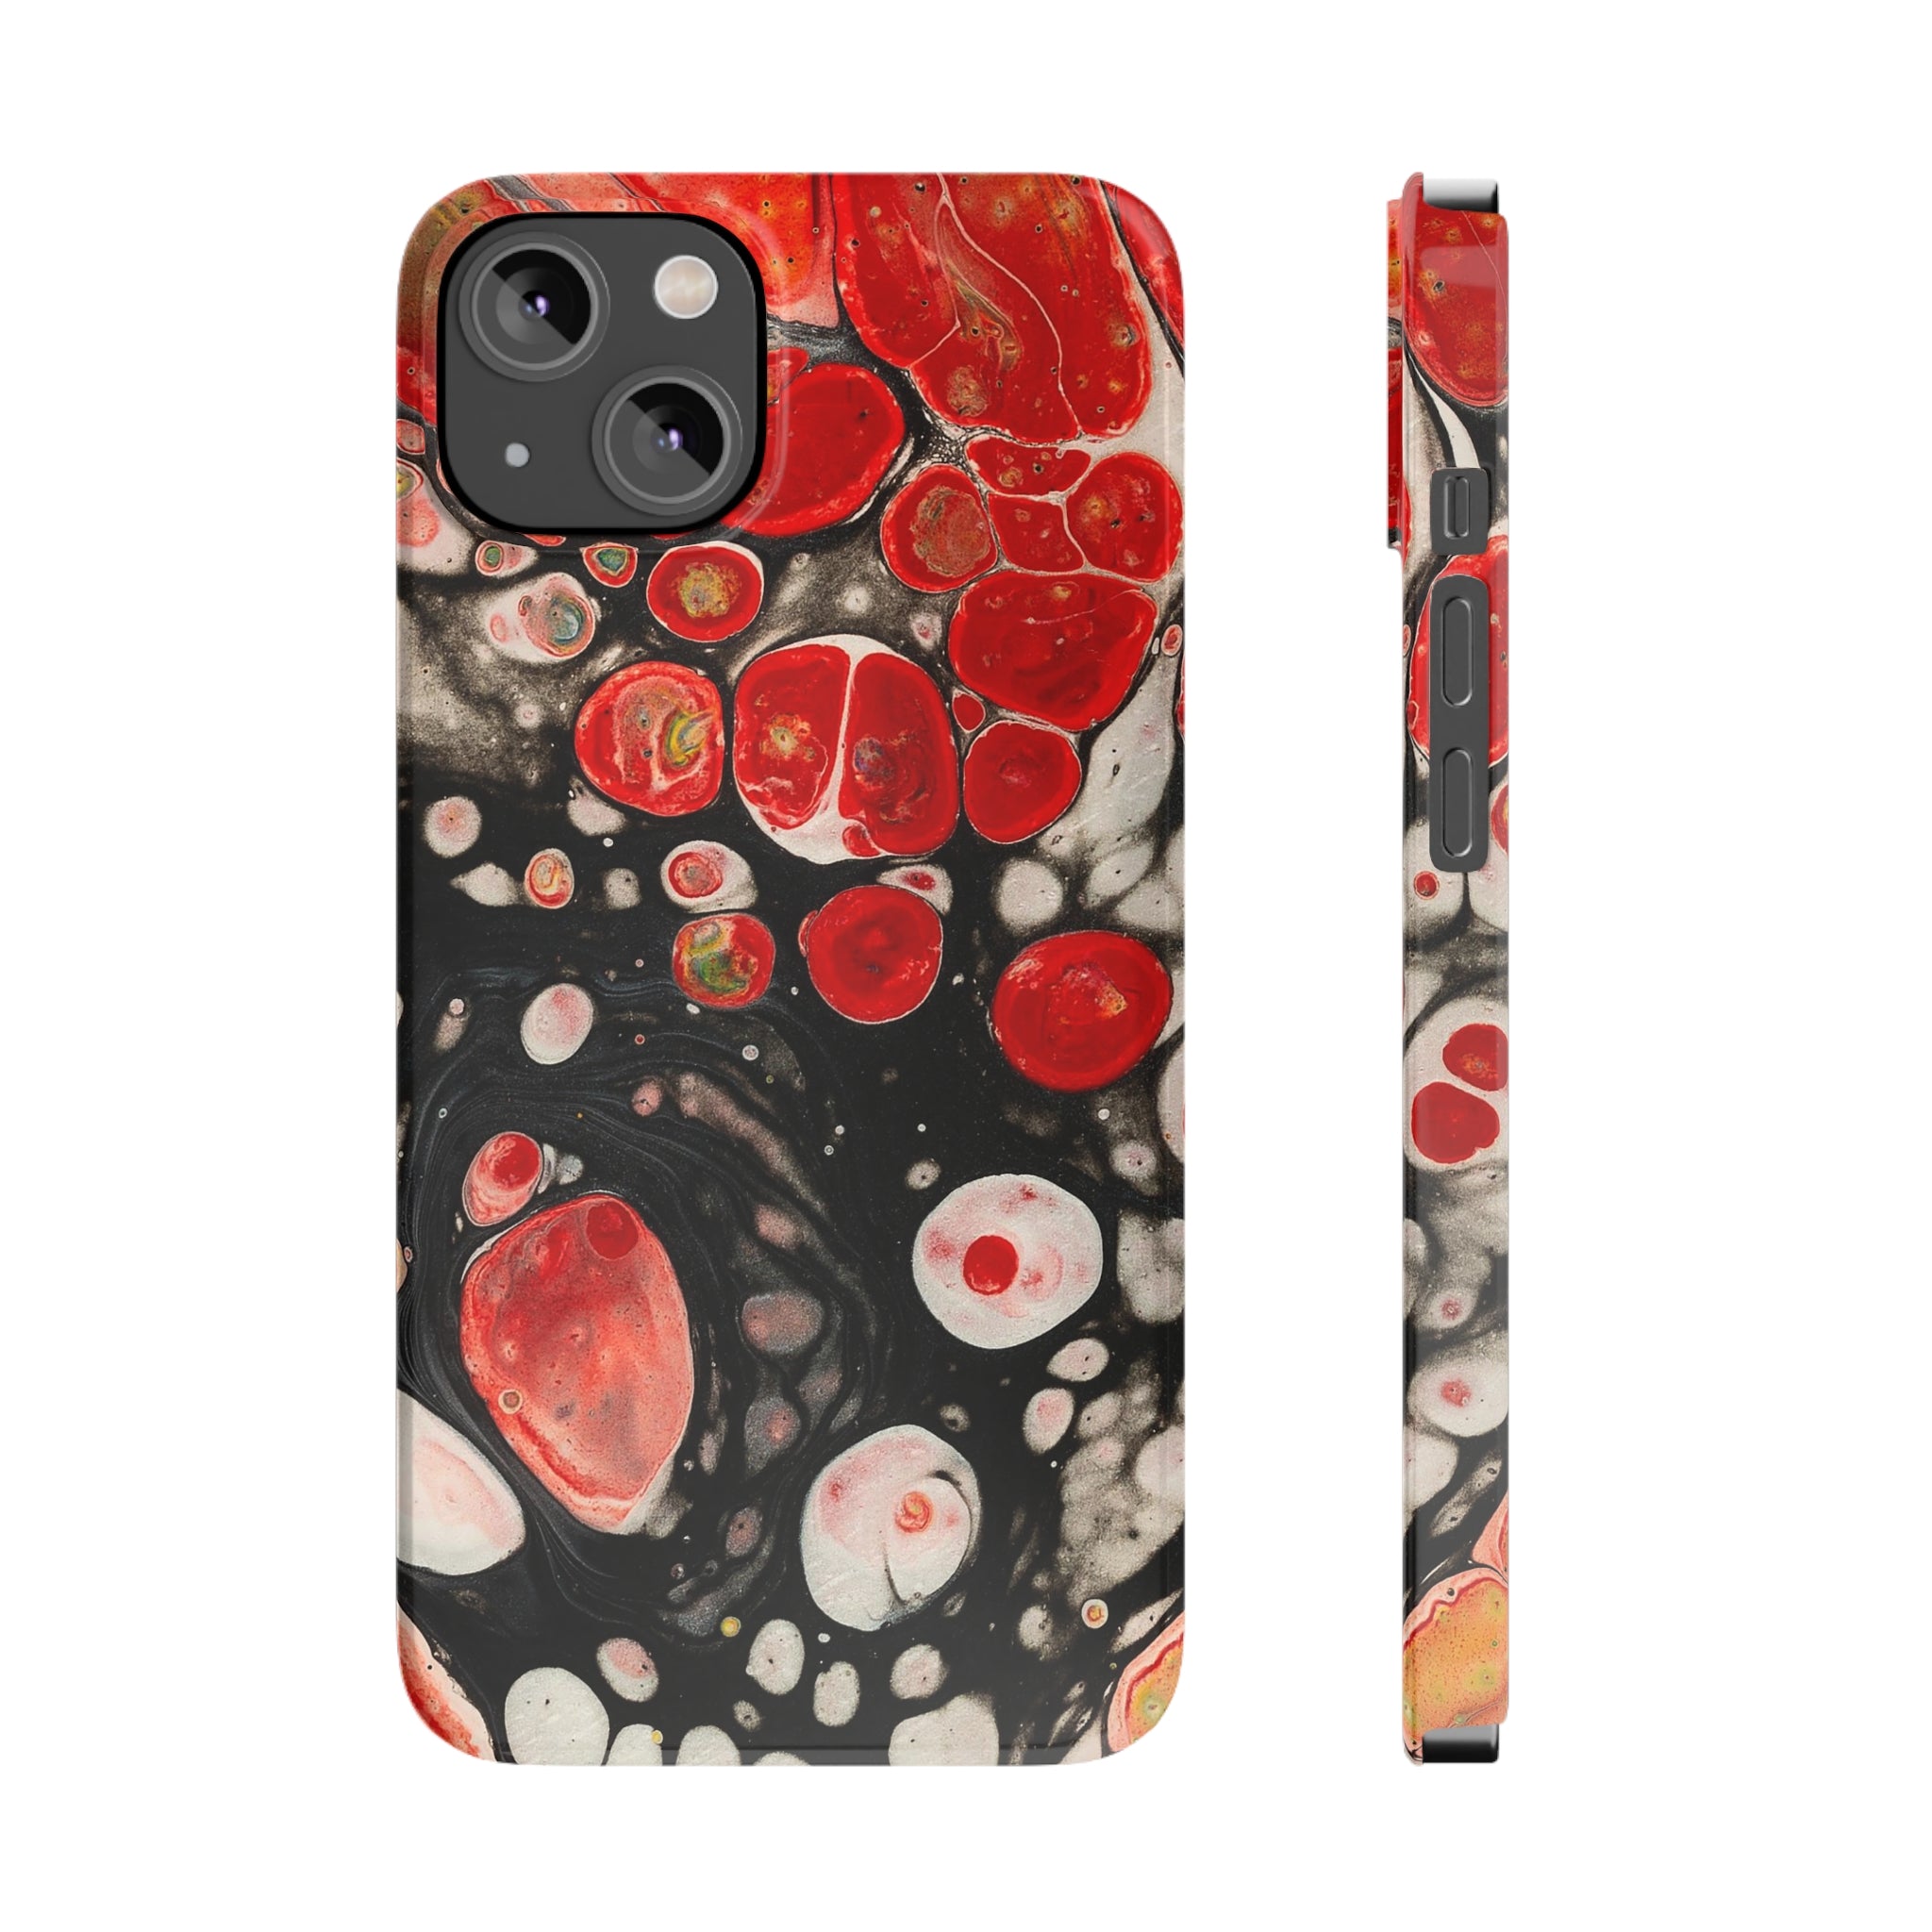 Exiting The Chaos - Slim Phone Cases